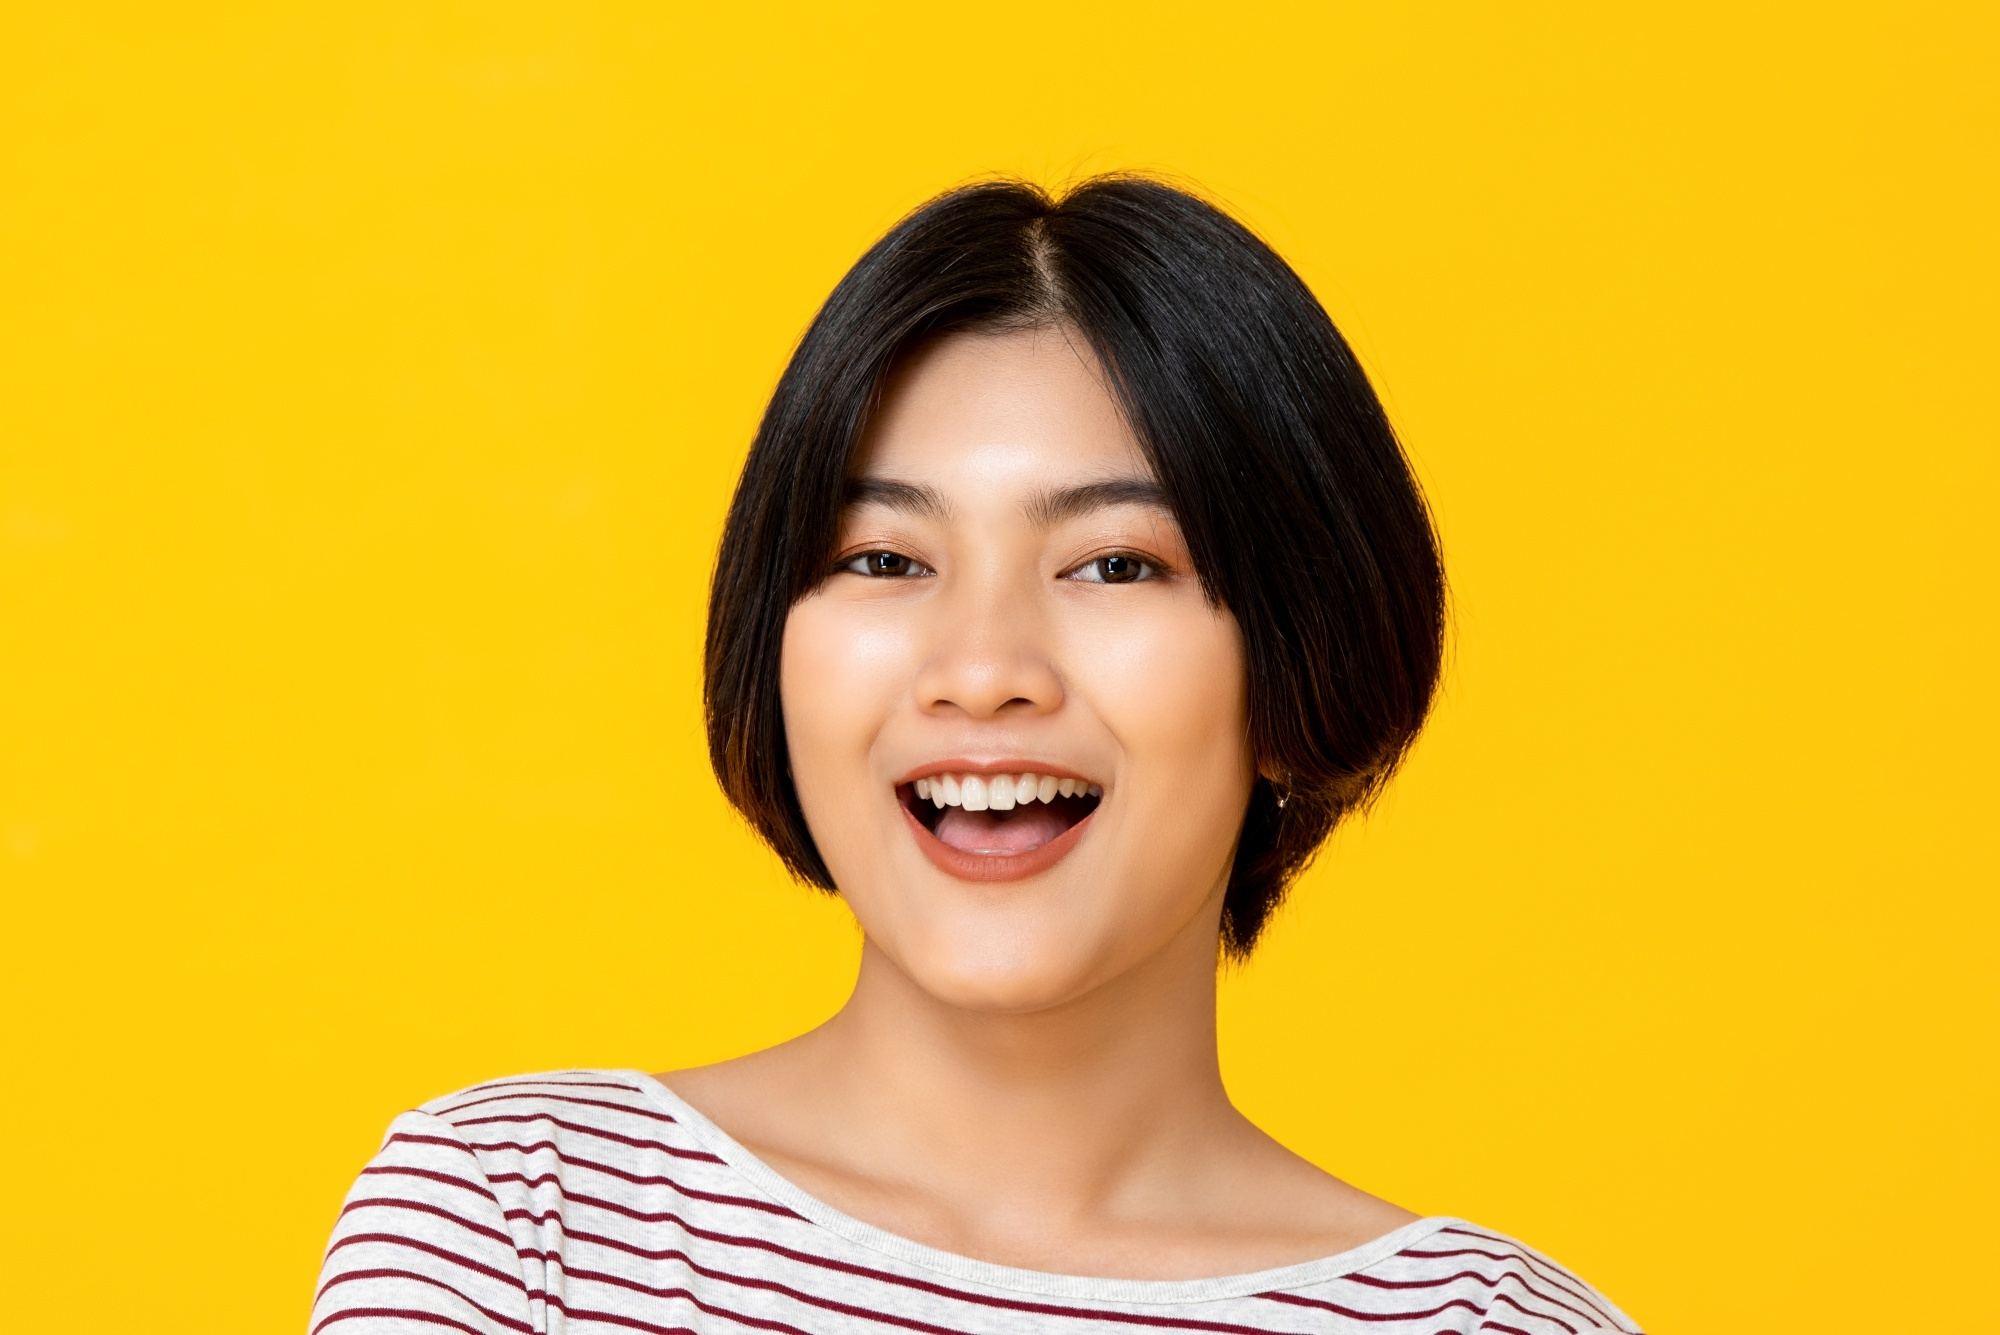 Apple cut hair: a woman smiling with her tapered apple cut